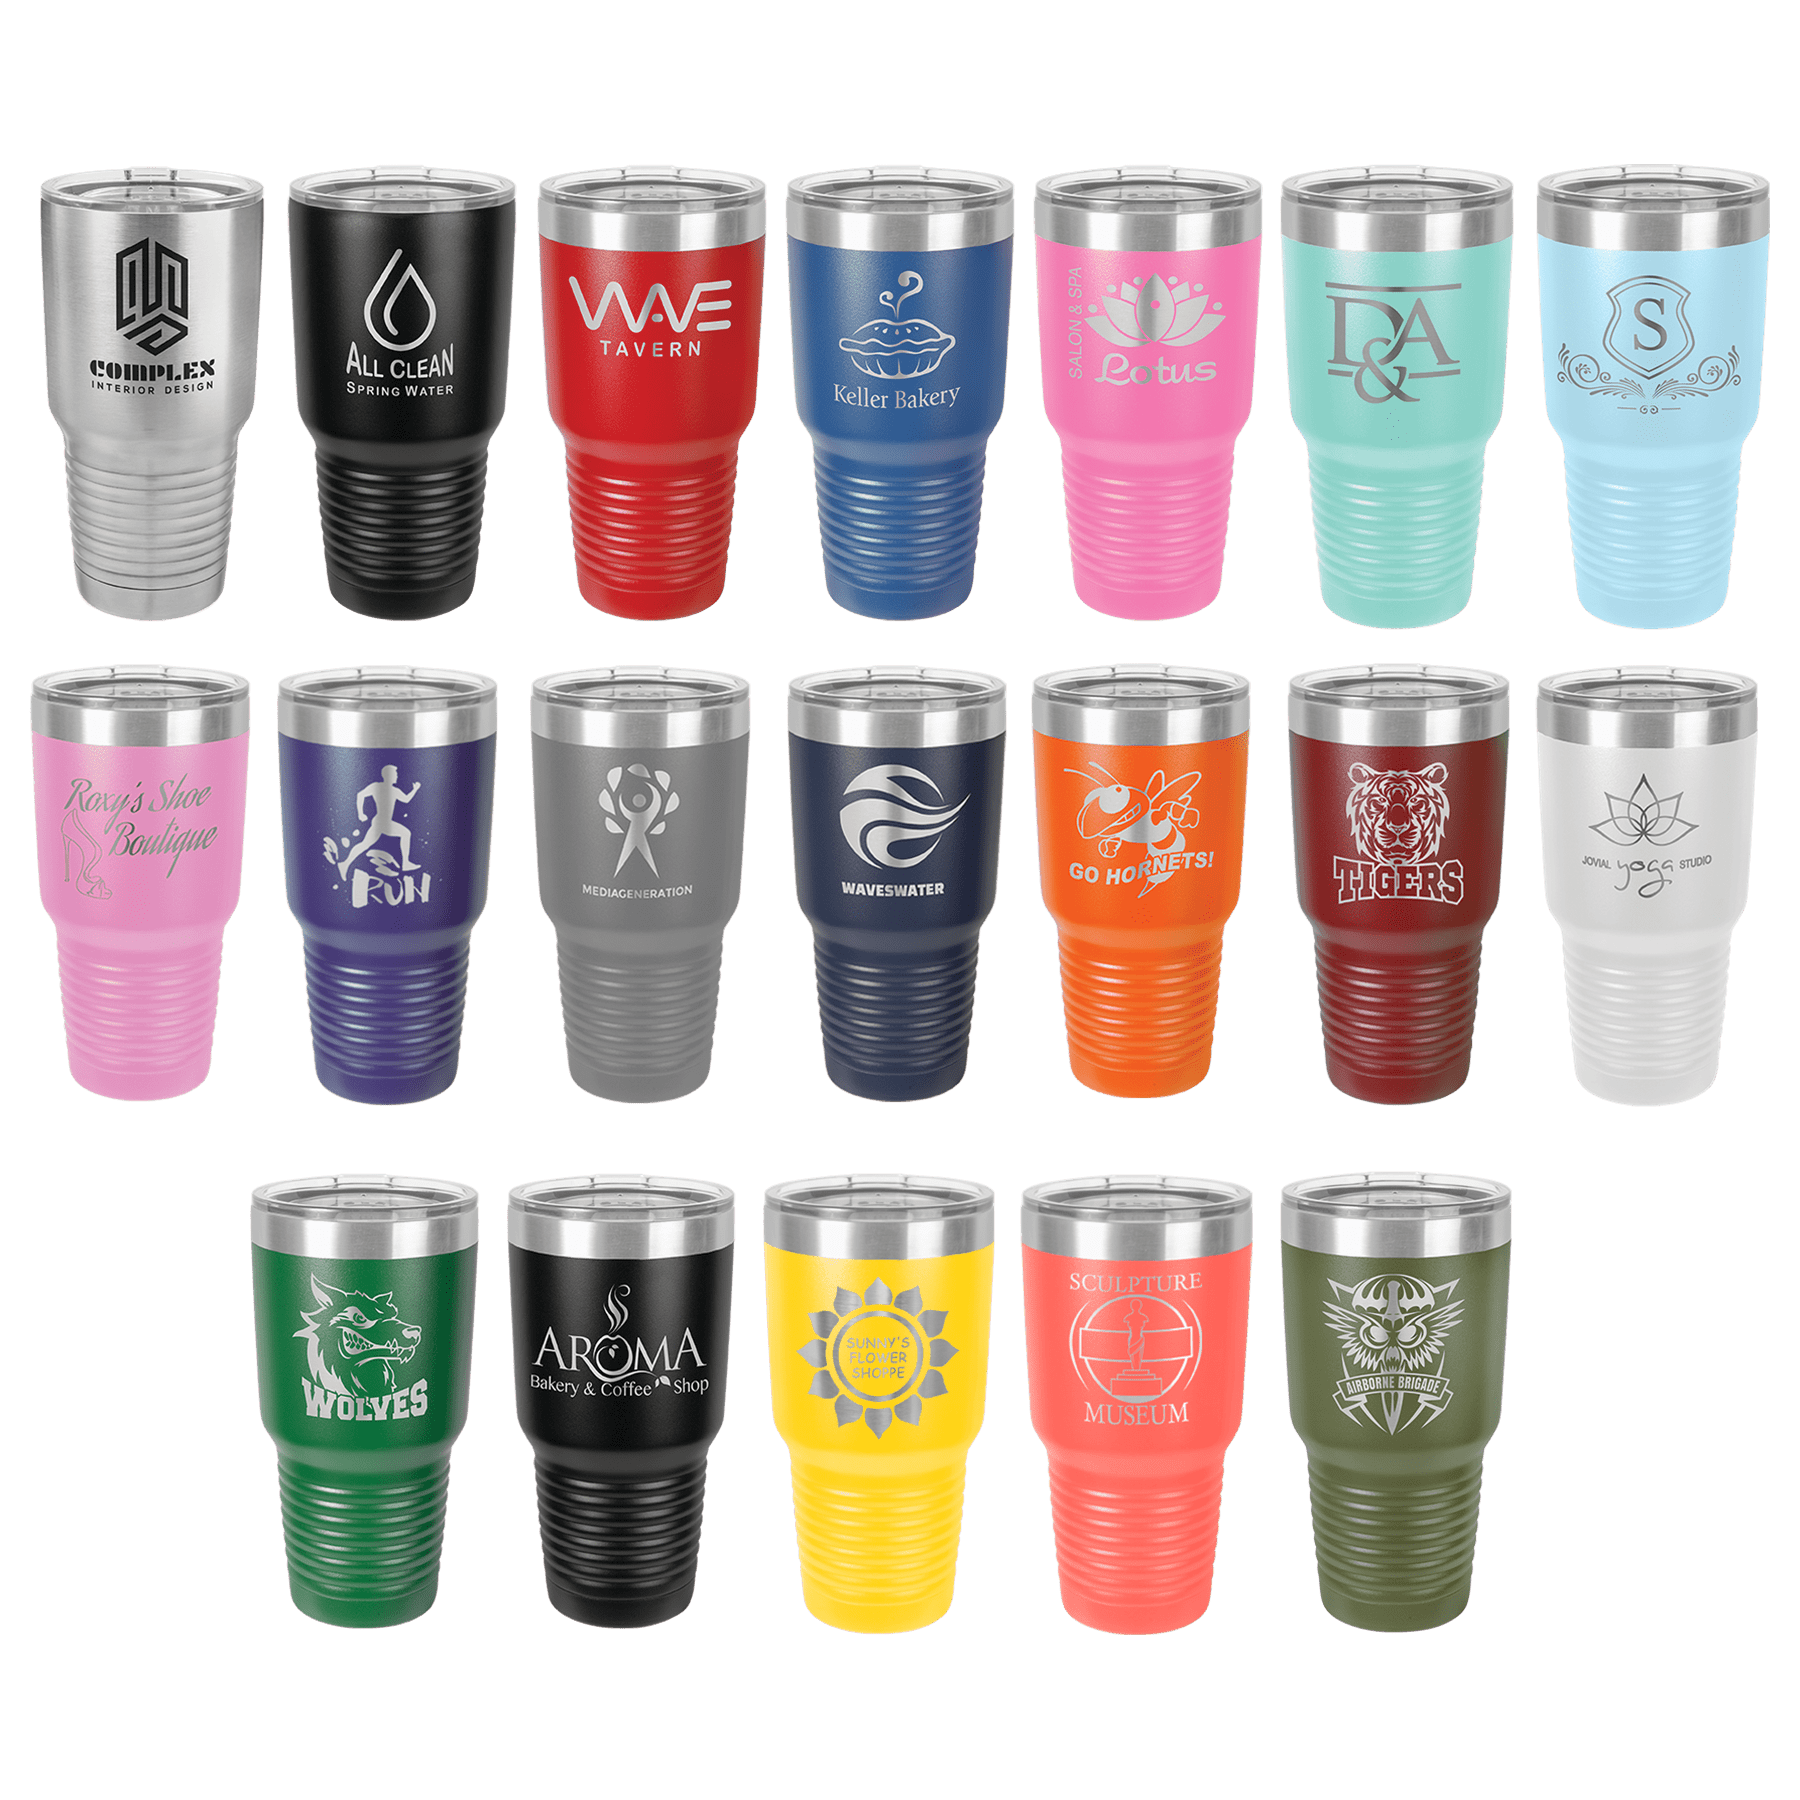 Custom Double-Wall Stainless Steel Tumbler, 30 oz. Slider Lid, Hot and Cold  - JennyGems